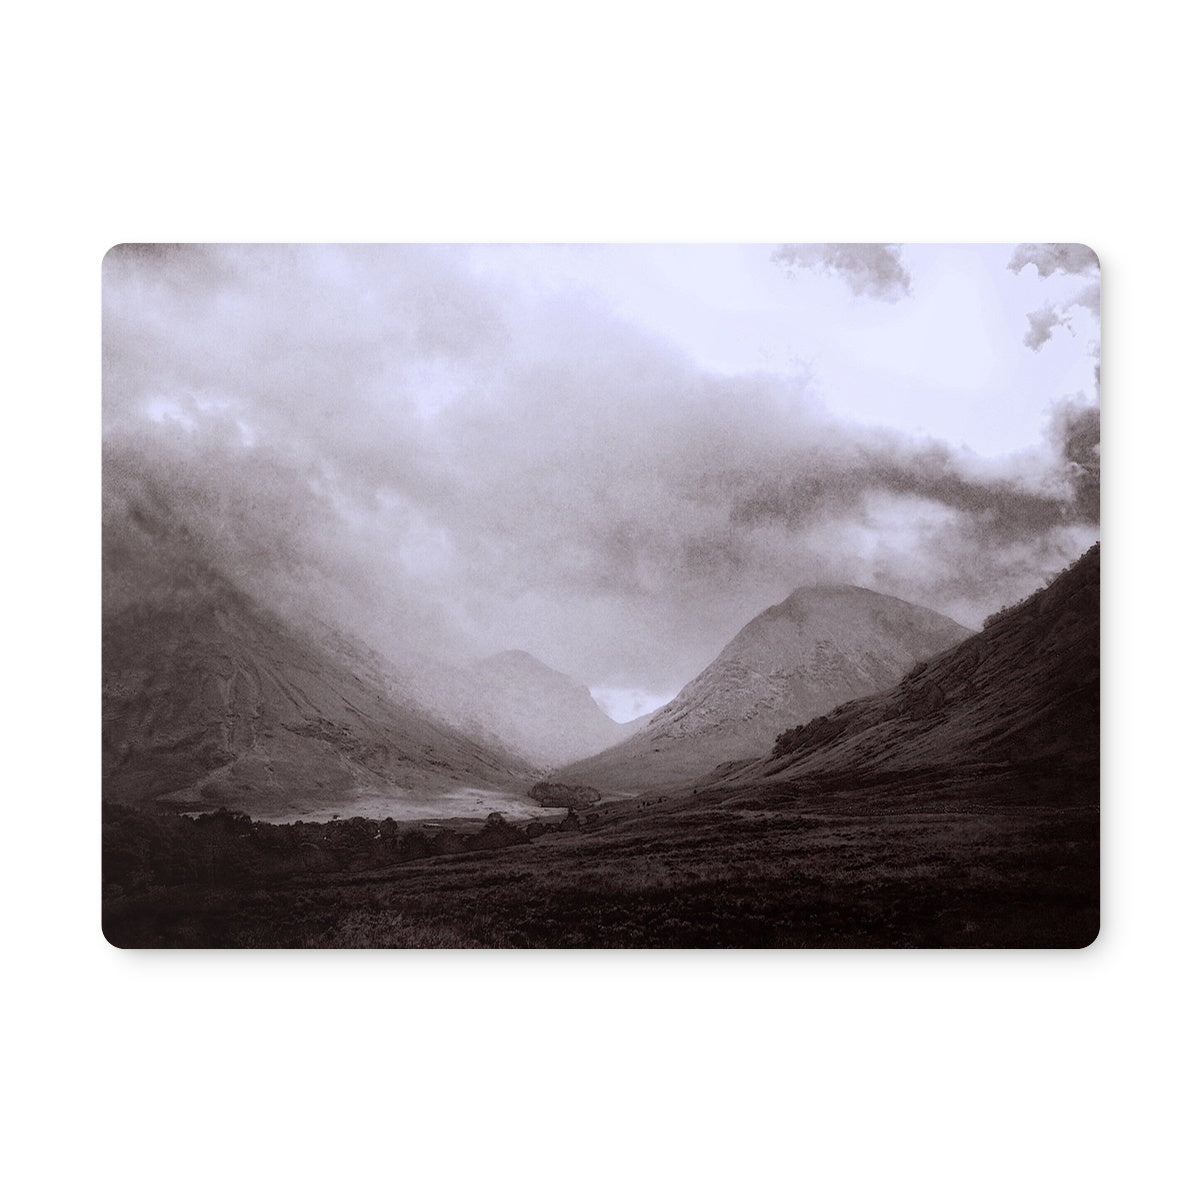 Glencoe Mist Art Gifts Placemat-Placemats-Glencoe Art Gallery-Single Placemat-Paintings, Prints, Homeware, Art Gifts From Scotland By Scottish Artist Kevin Hunter